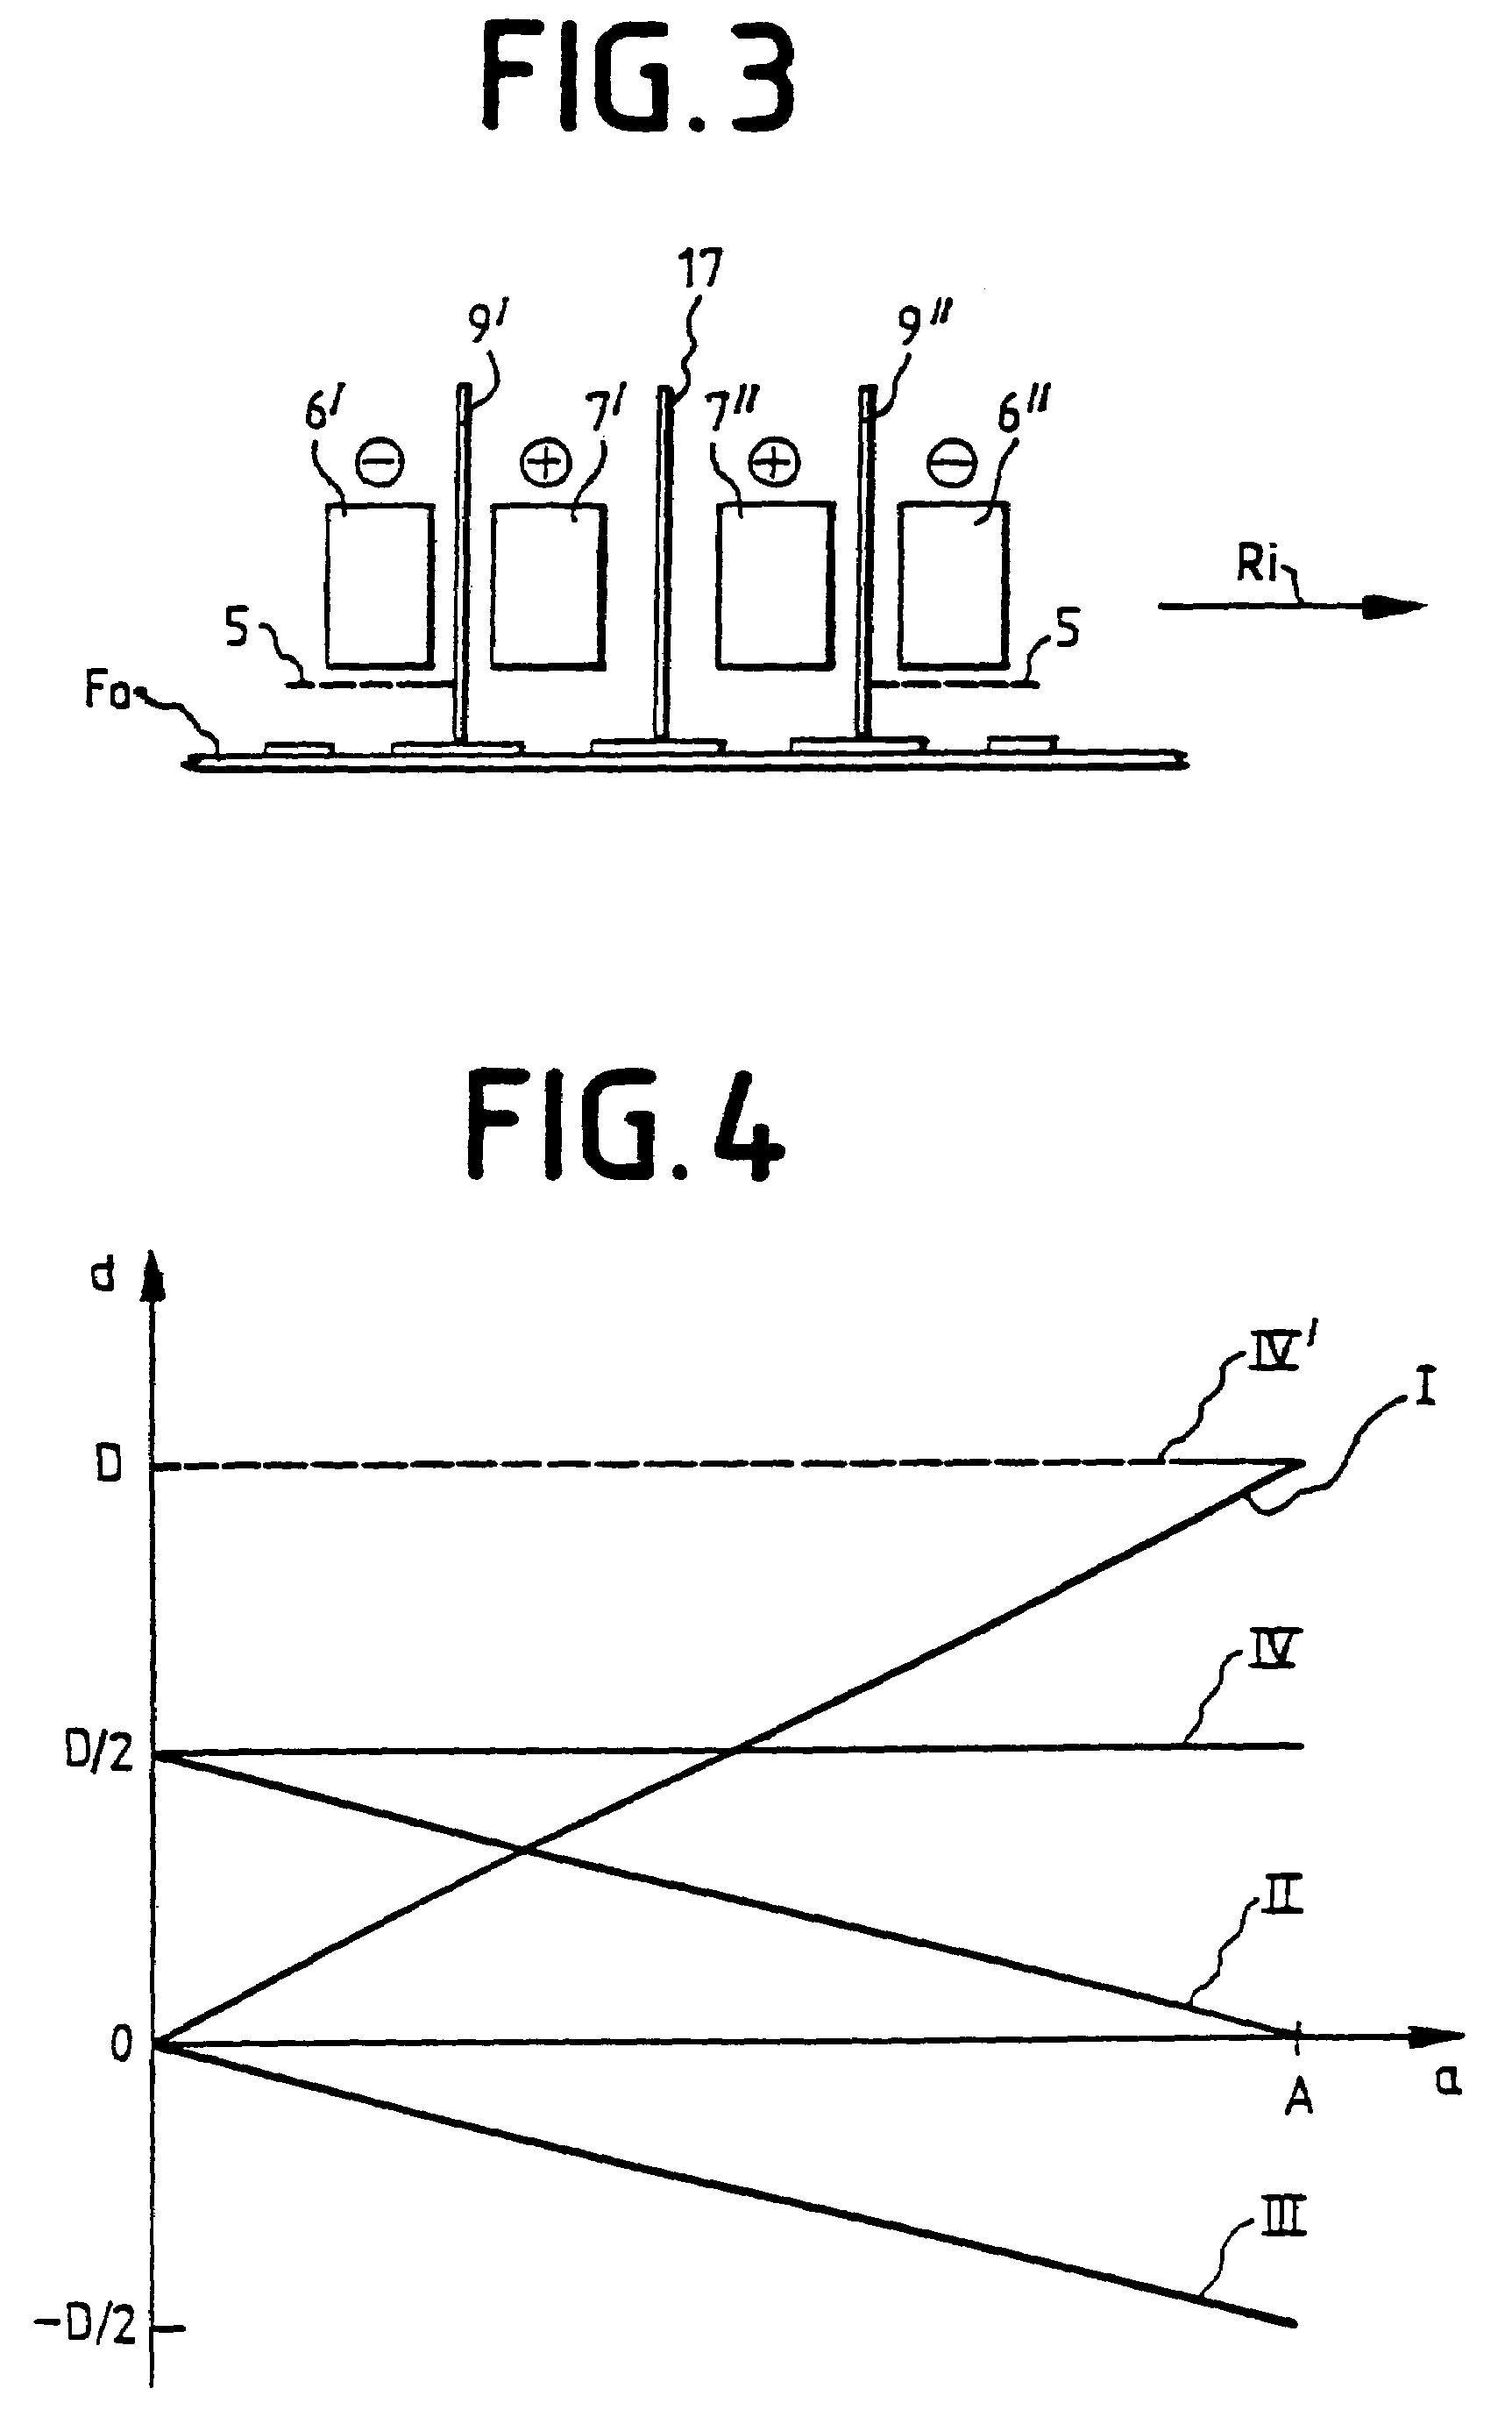 Method and device for the electrolytic treatment of electrically conducting structures which are insulated from each other and positioned on the surface of electrically insulating film materials and use of the method